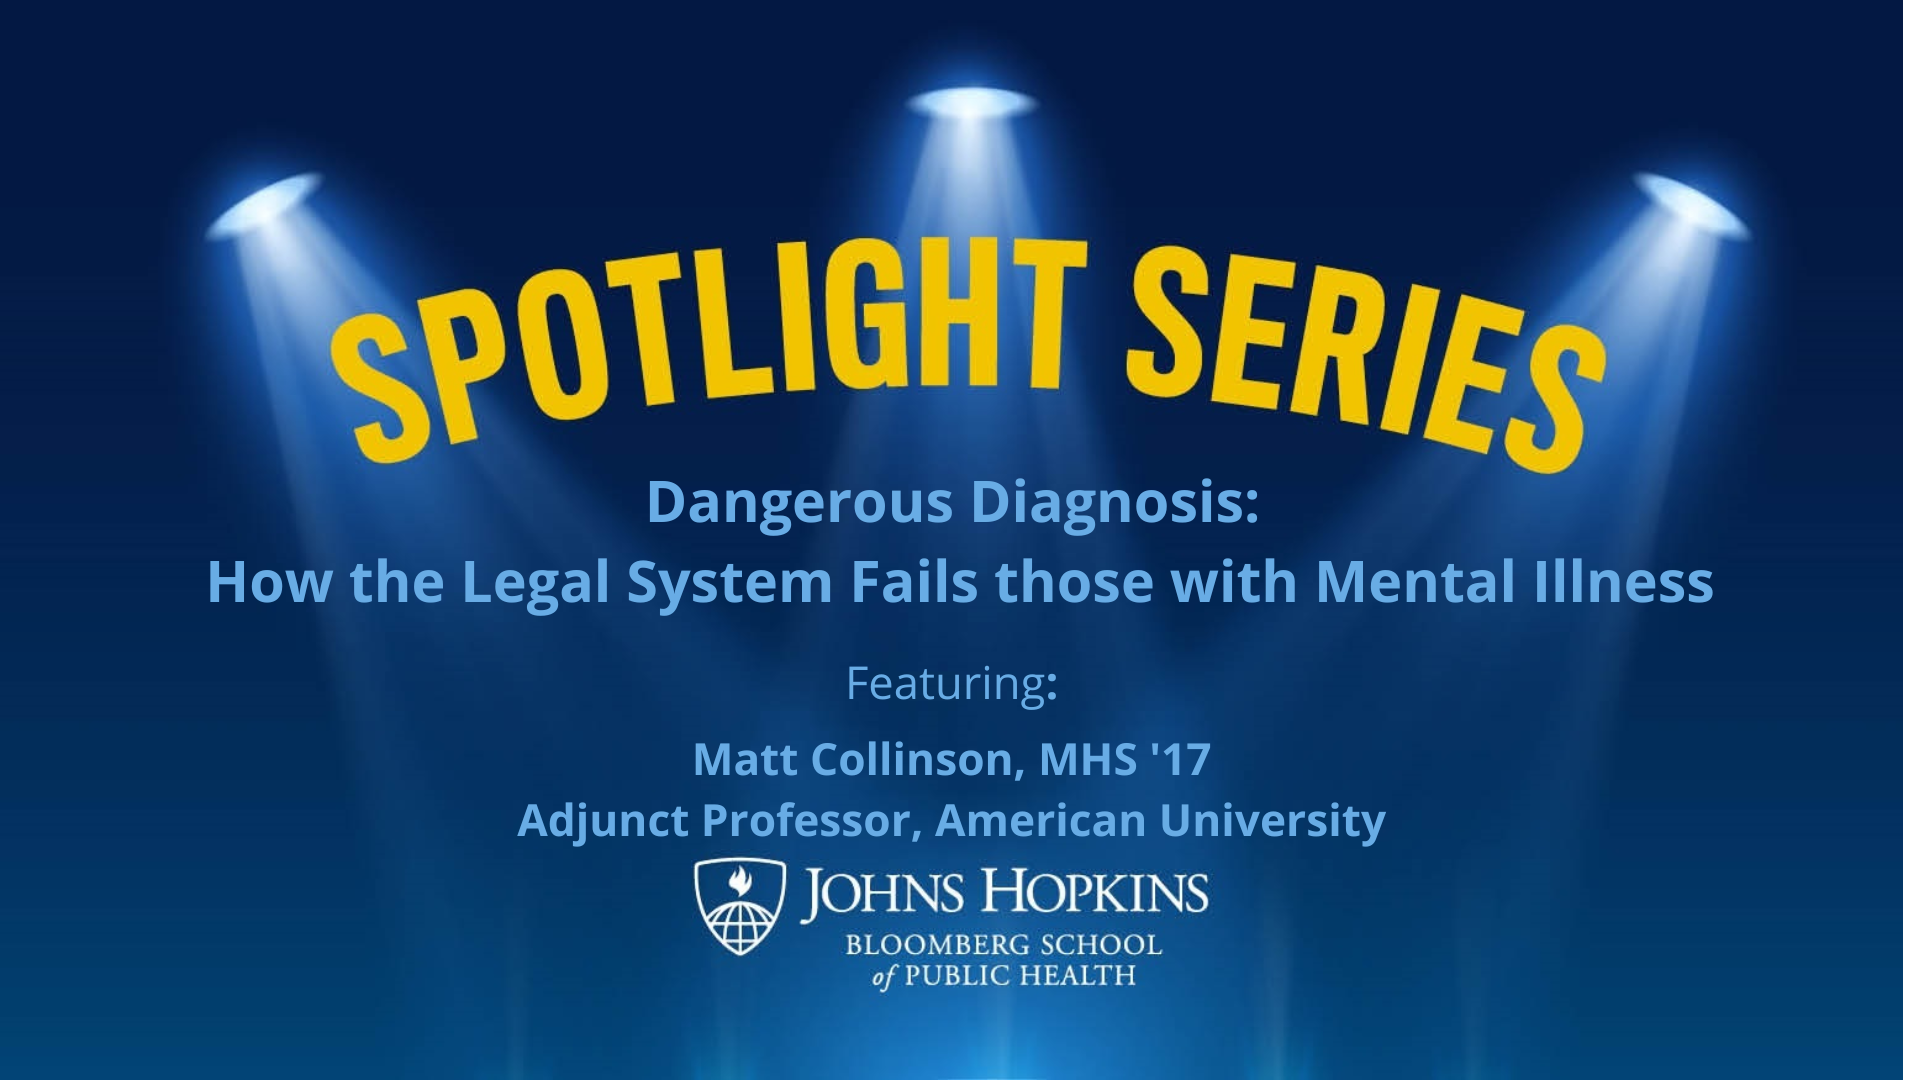 Dangerous Diagnosis: How the Legal System Fails Those with Mental Illness